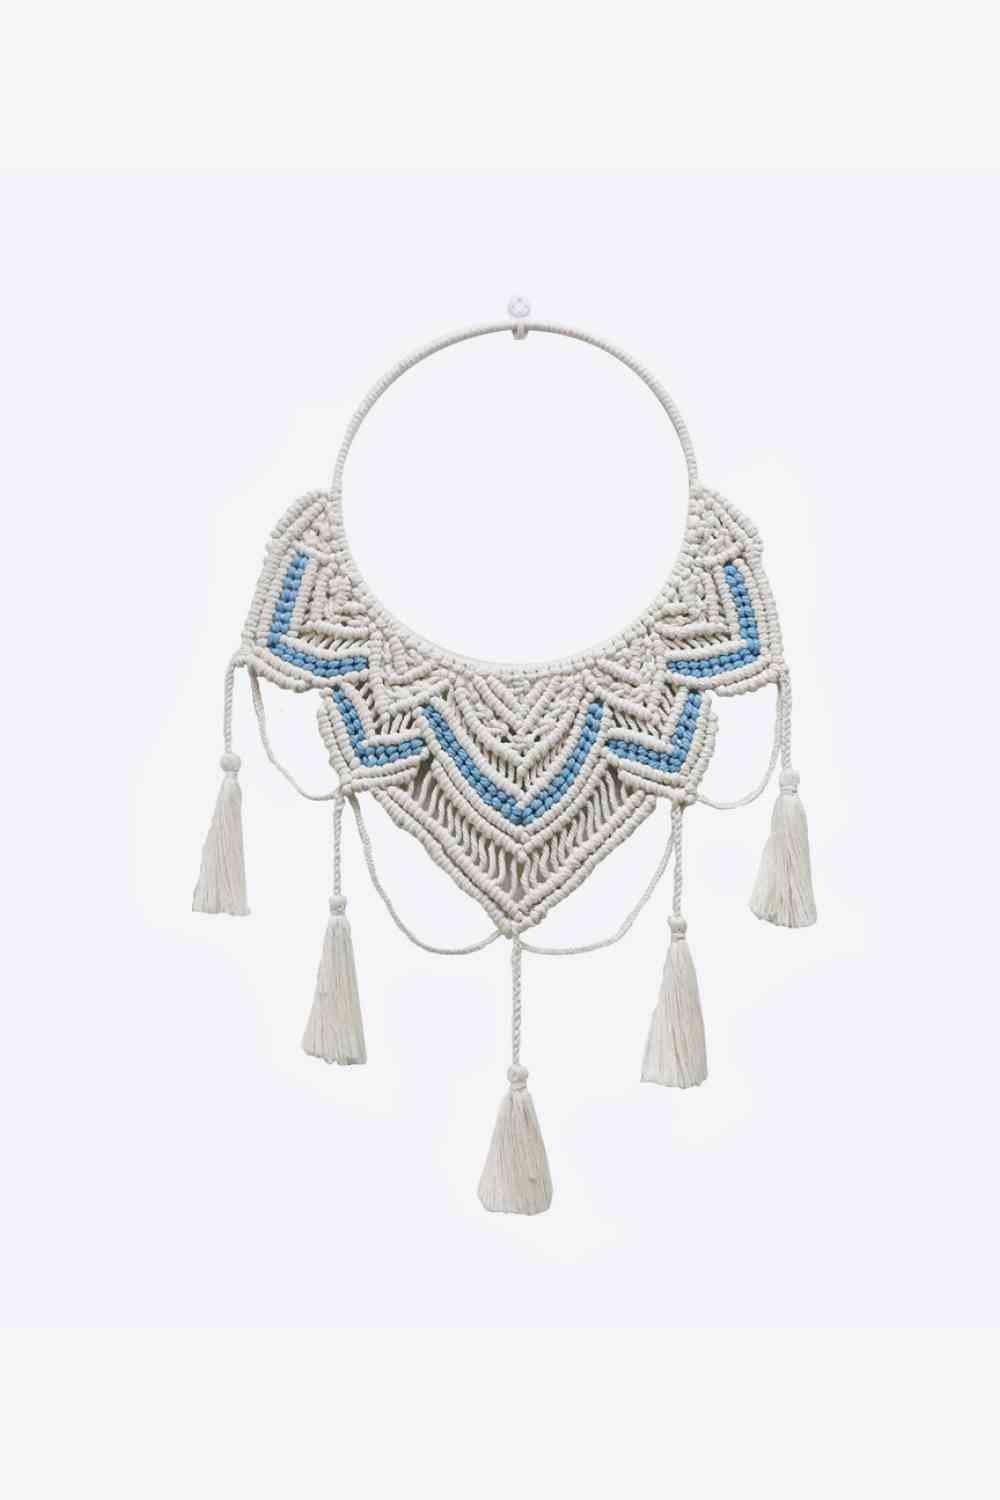 Macrame Wall Hanging with Tassel - BloomBliss.com